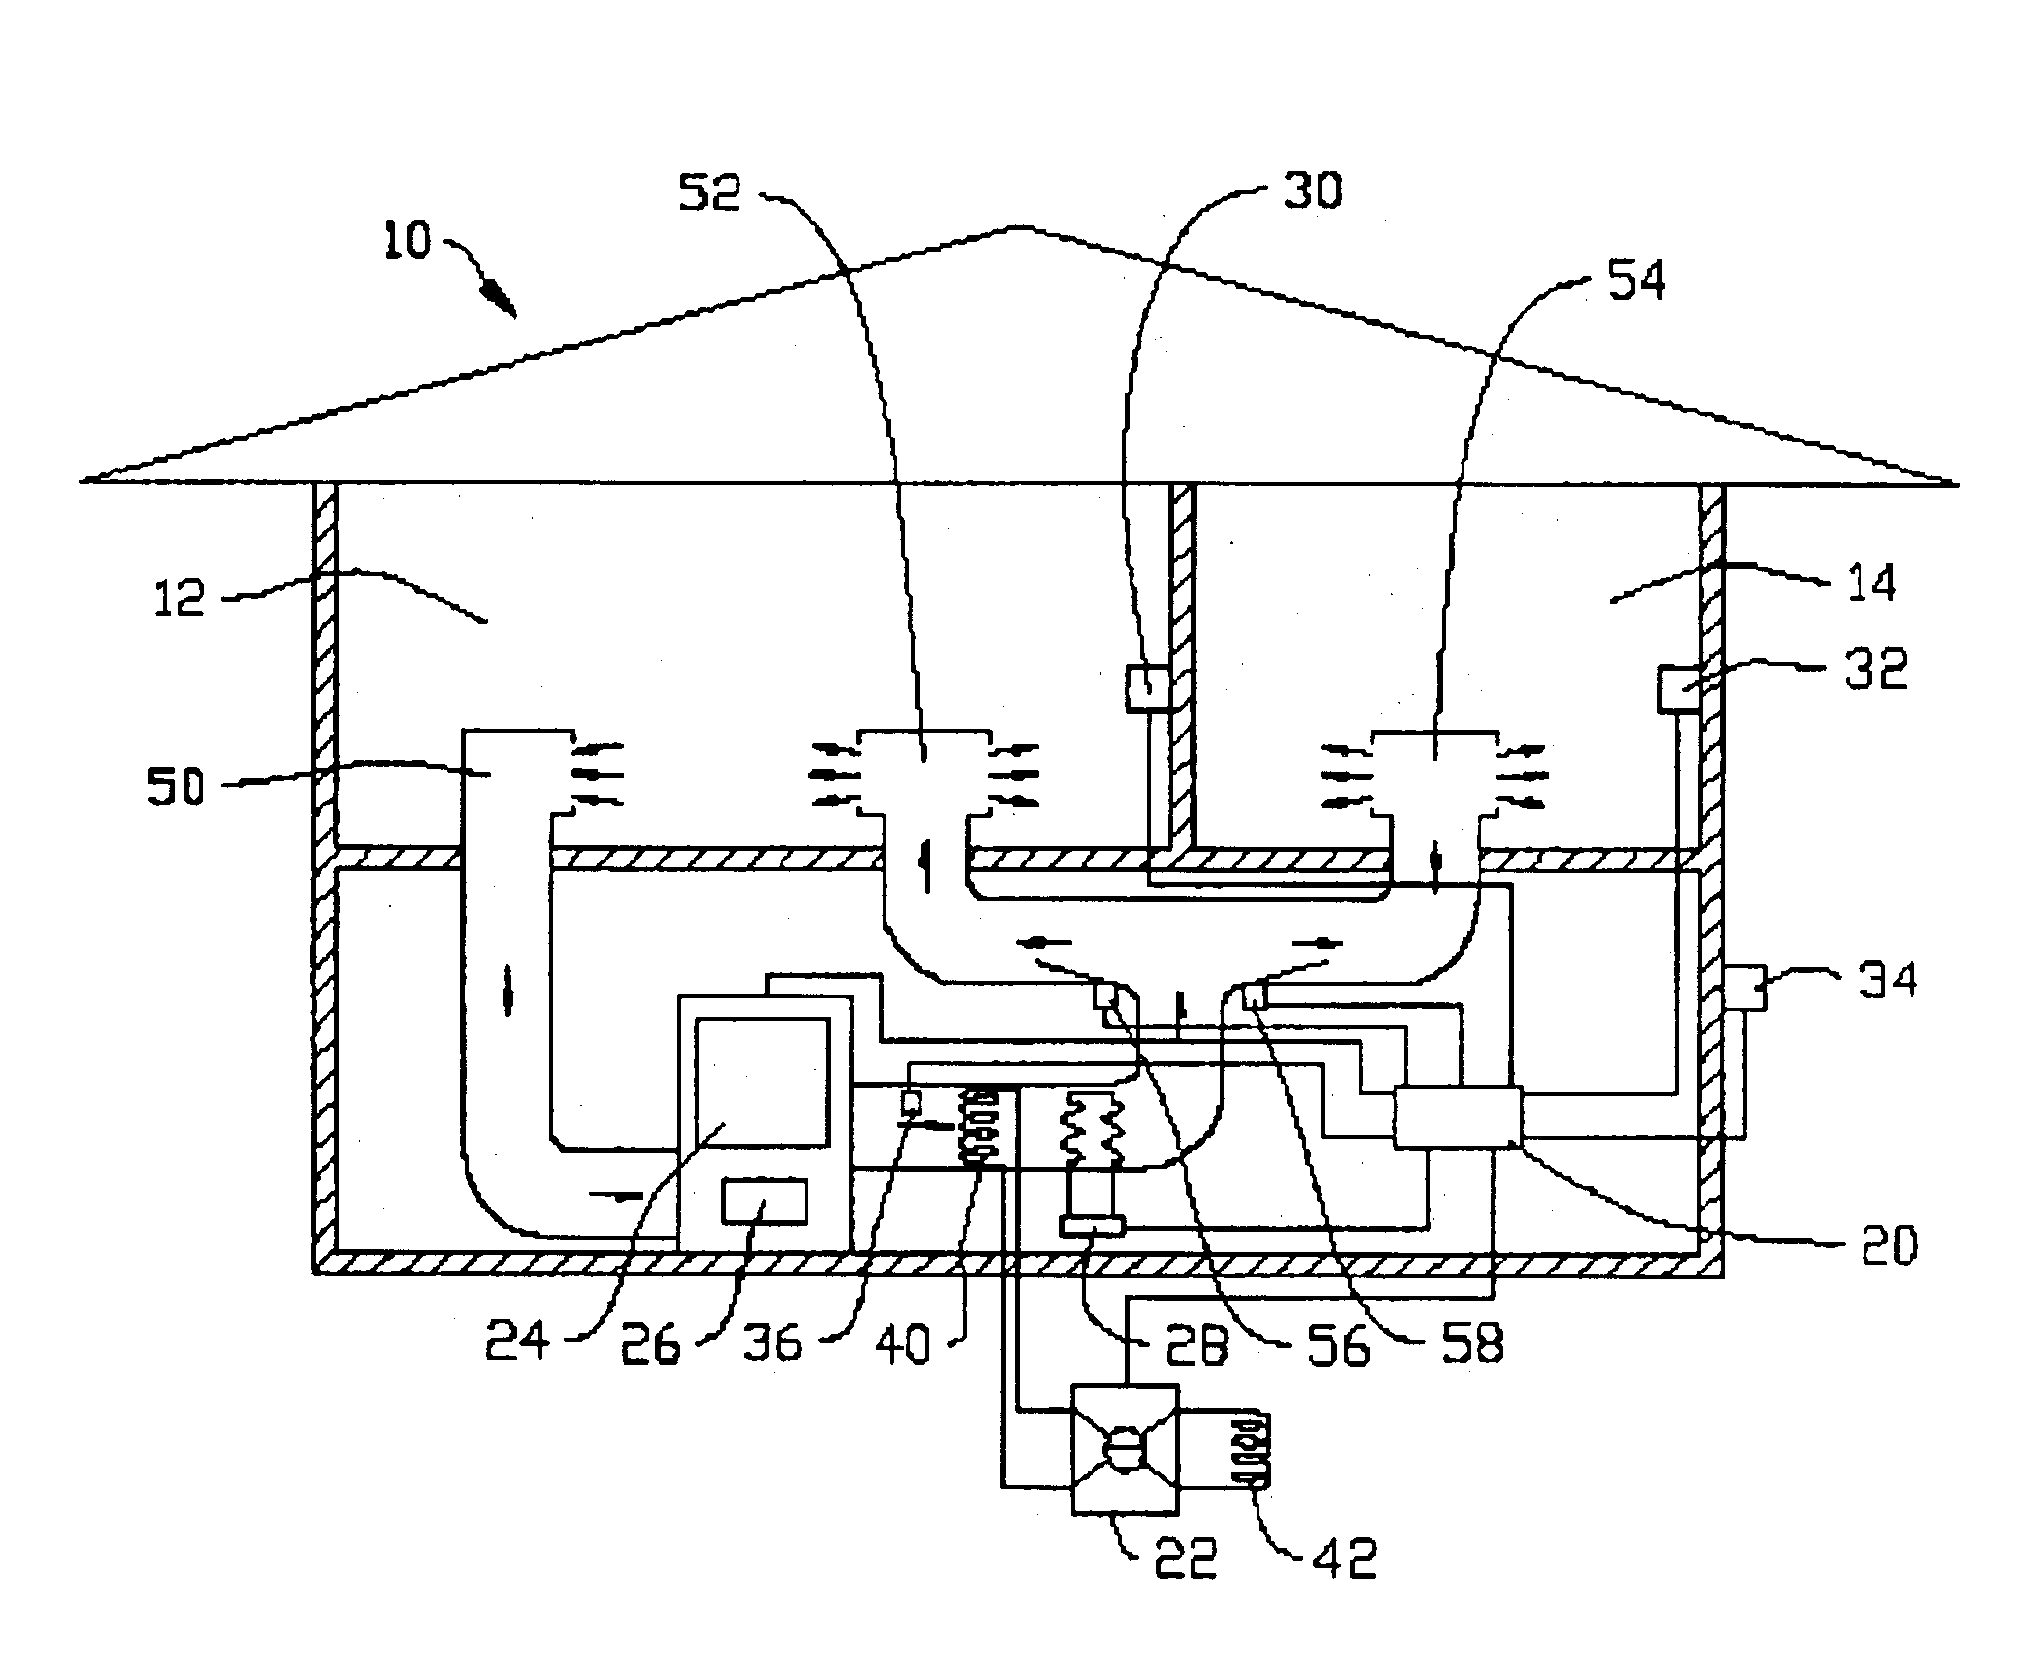 Method and apparatus for controlling a multi-source heating system